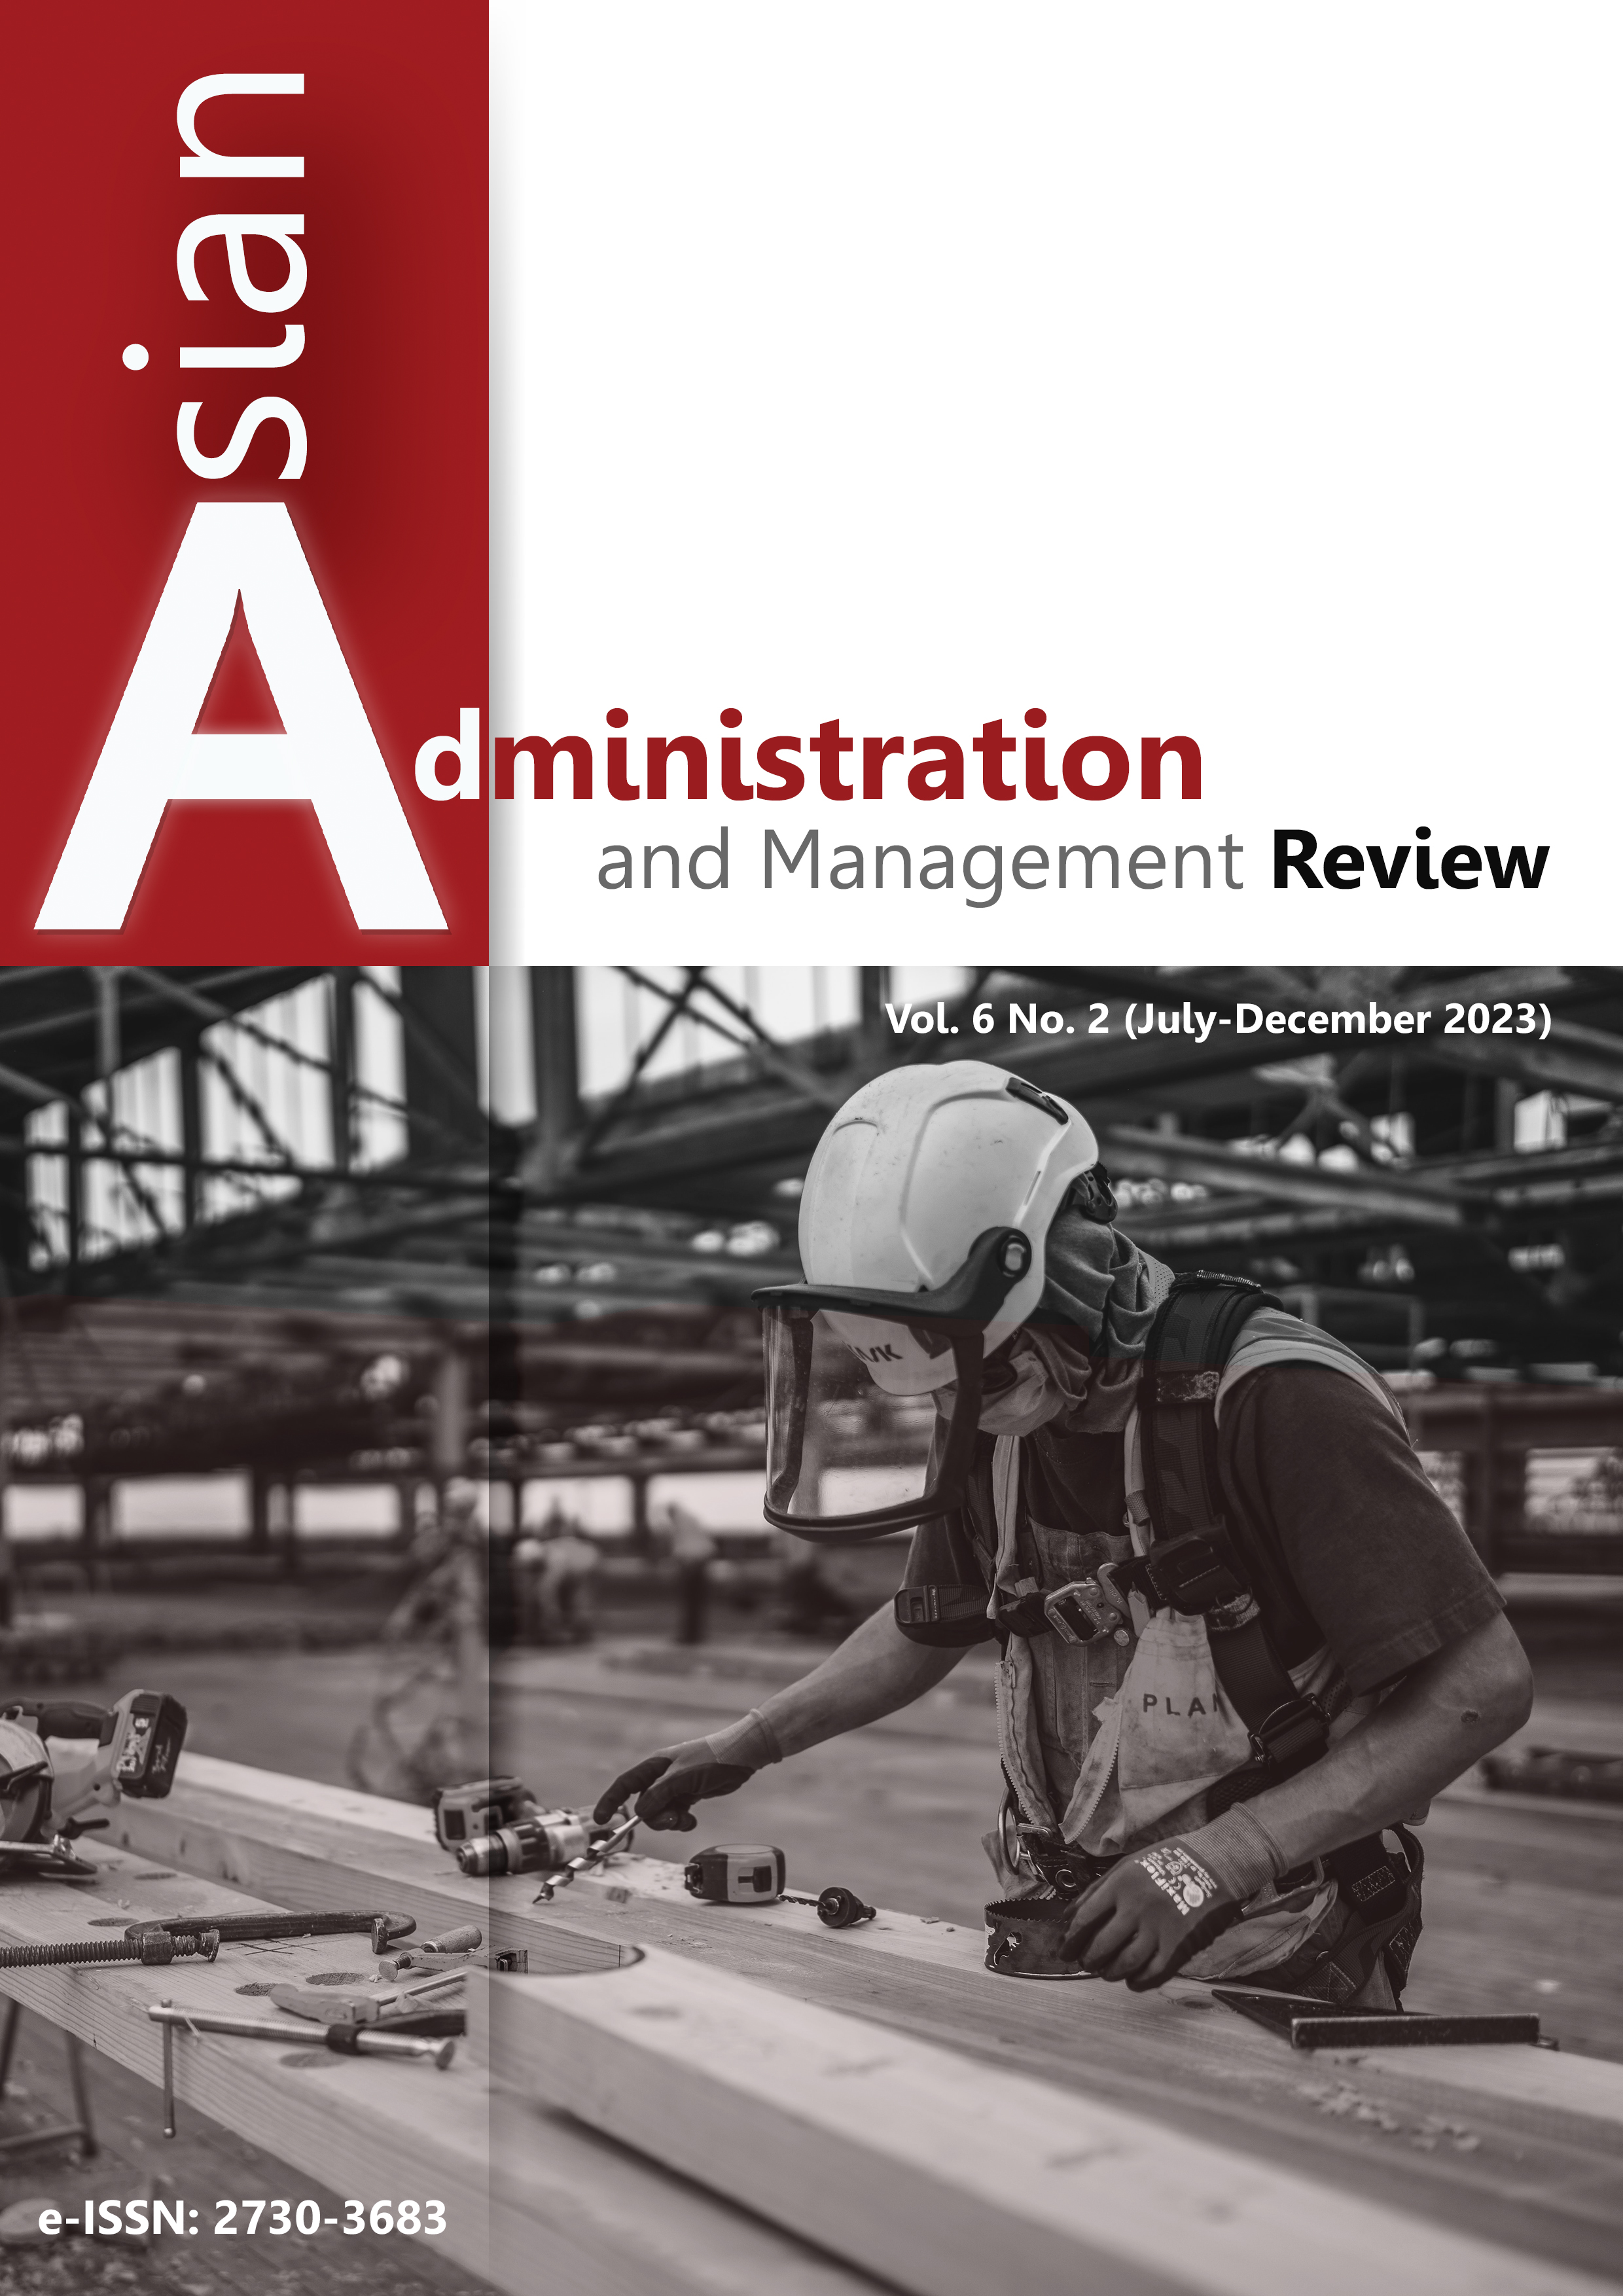 					View Vol. 6 No. 2 (2023): Asian Administration and Management Review
				